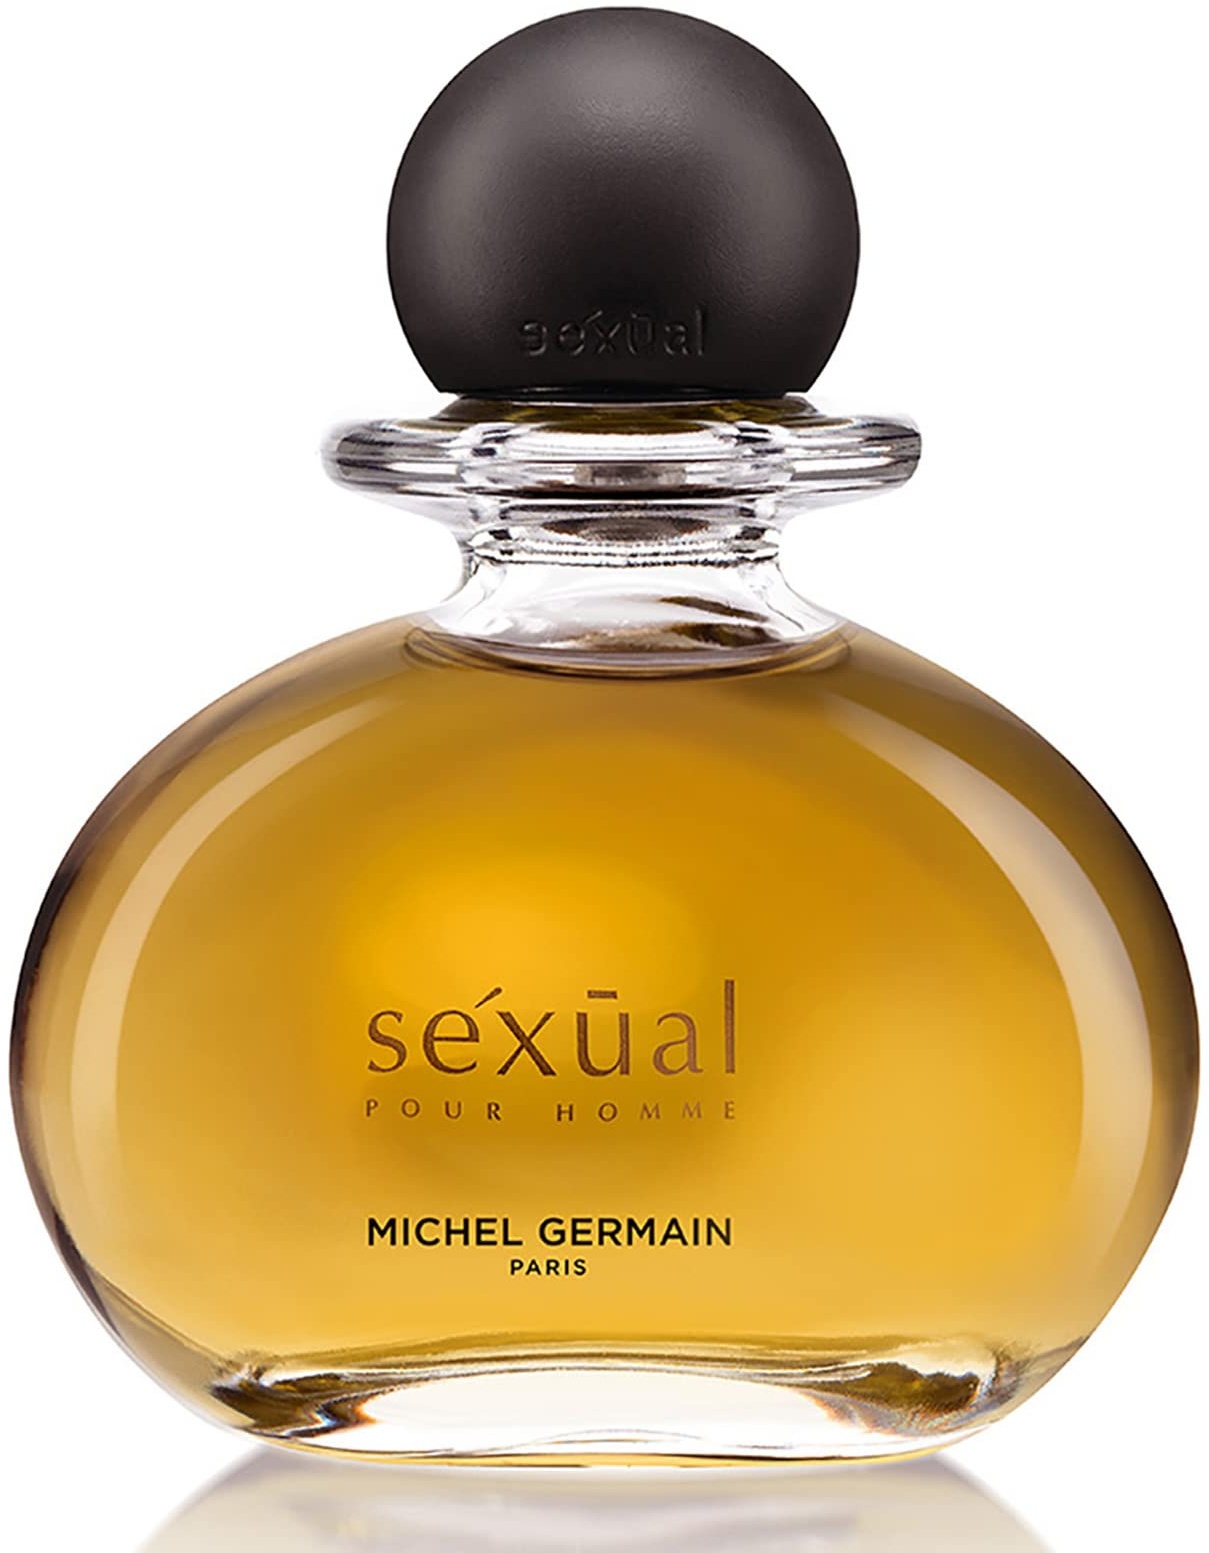 Michel Germain Sexual Pour Homme - Green Fruity Cologne for Men - Notes of Bergamot, Asian Sage and Vanilla - Infused with Natural Oils - Long Lasting - Suitable for any Occasion - 75 ml EDT Spray